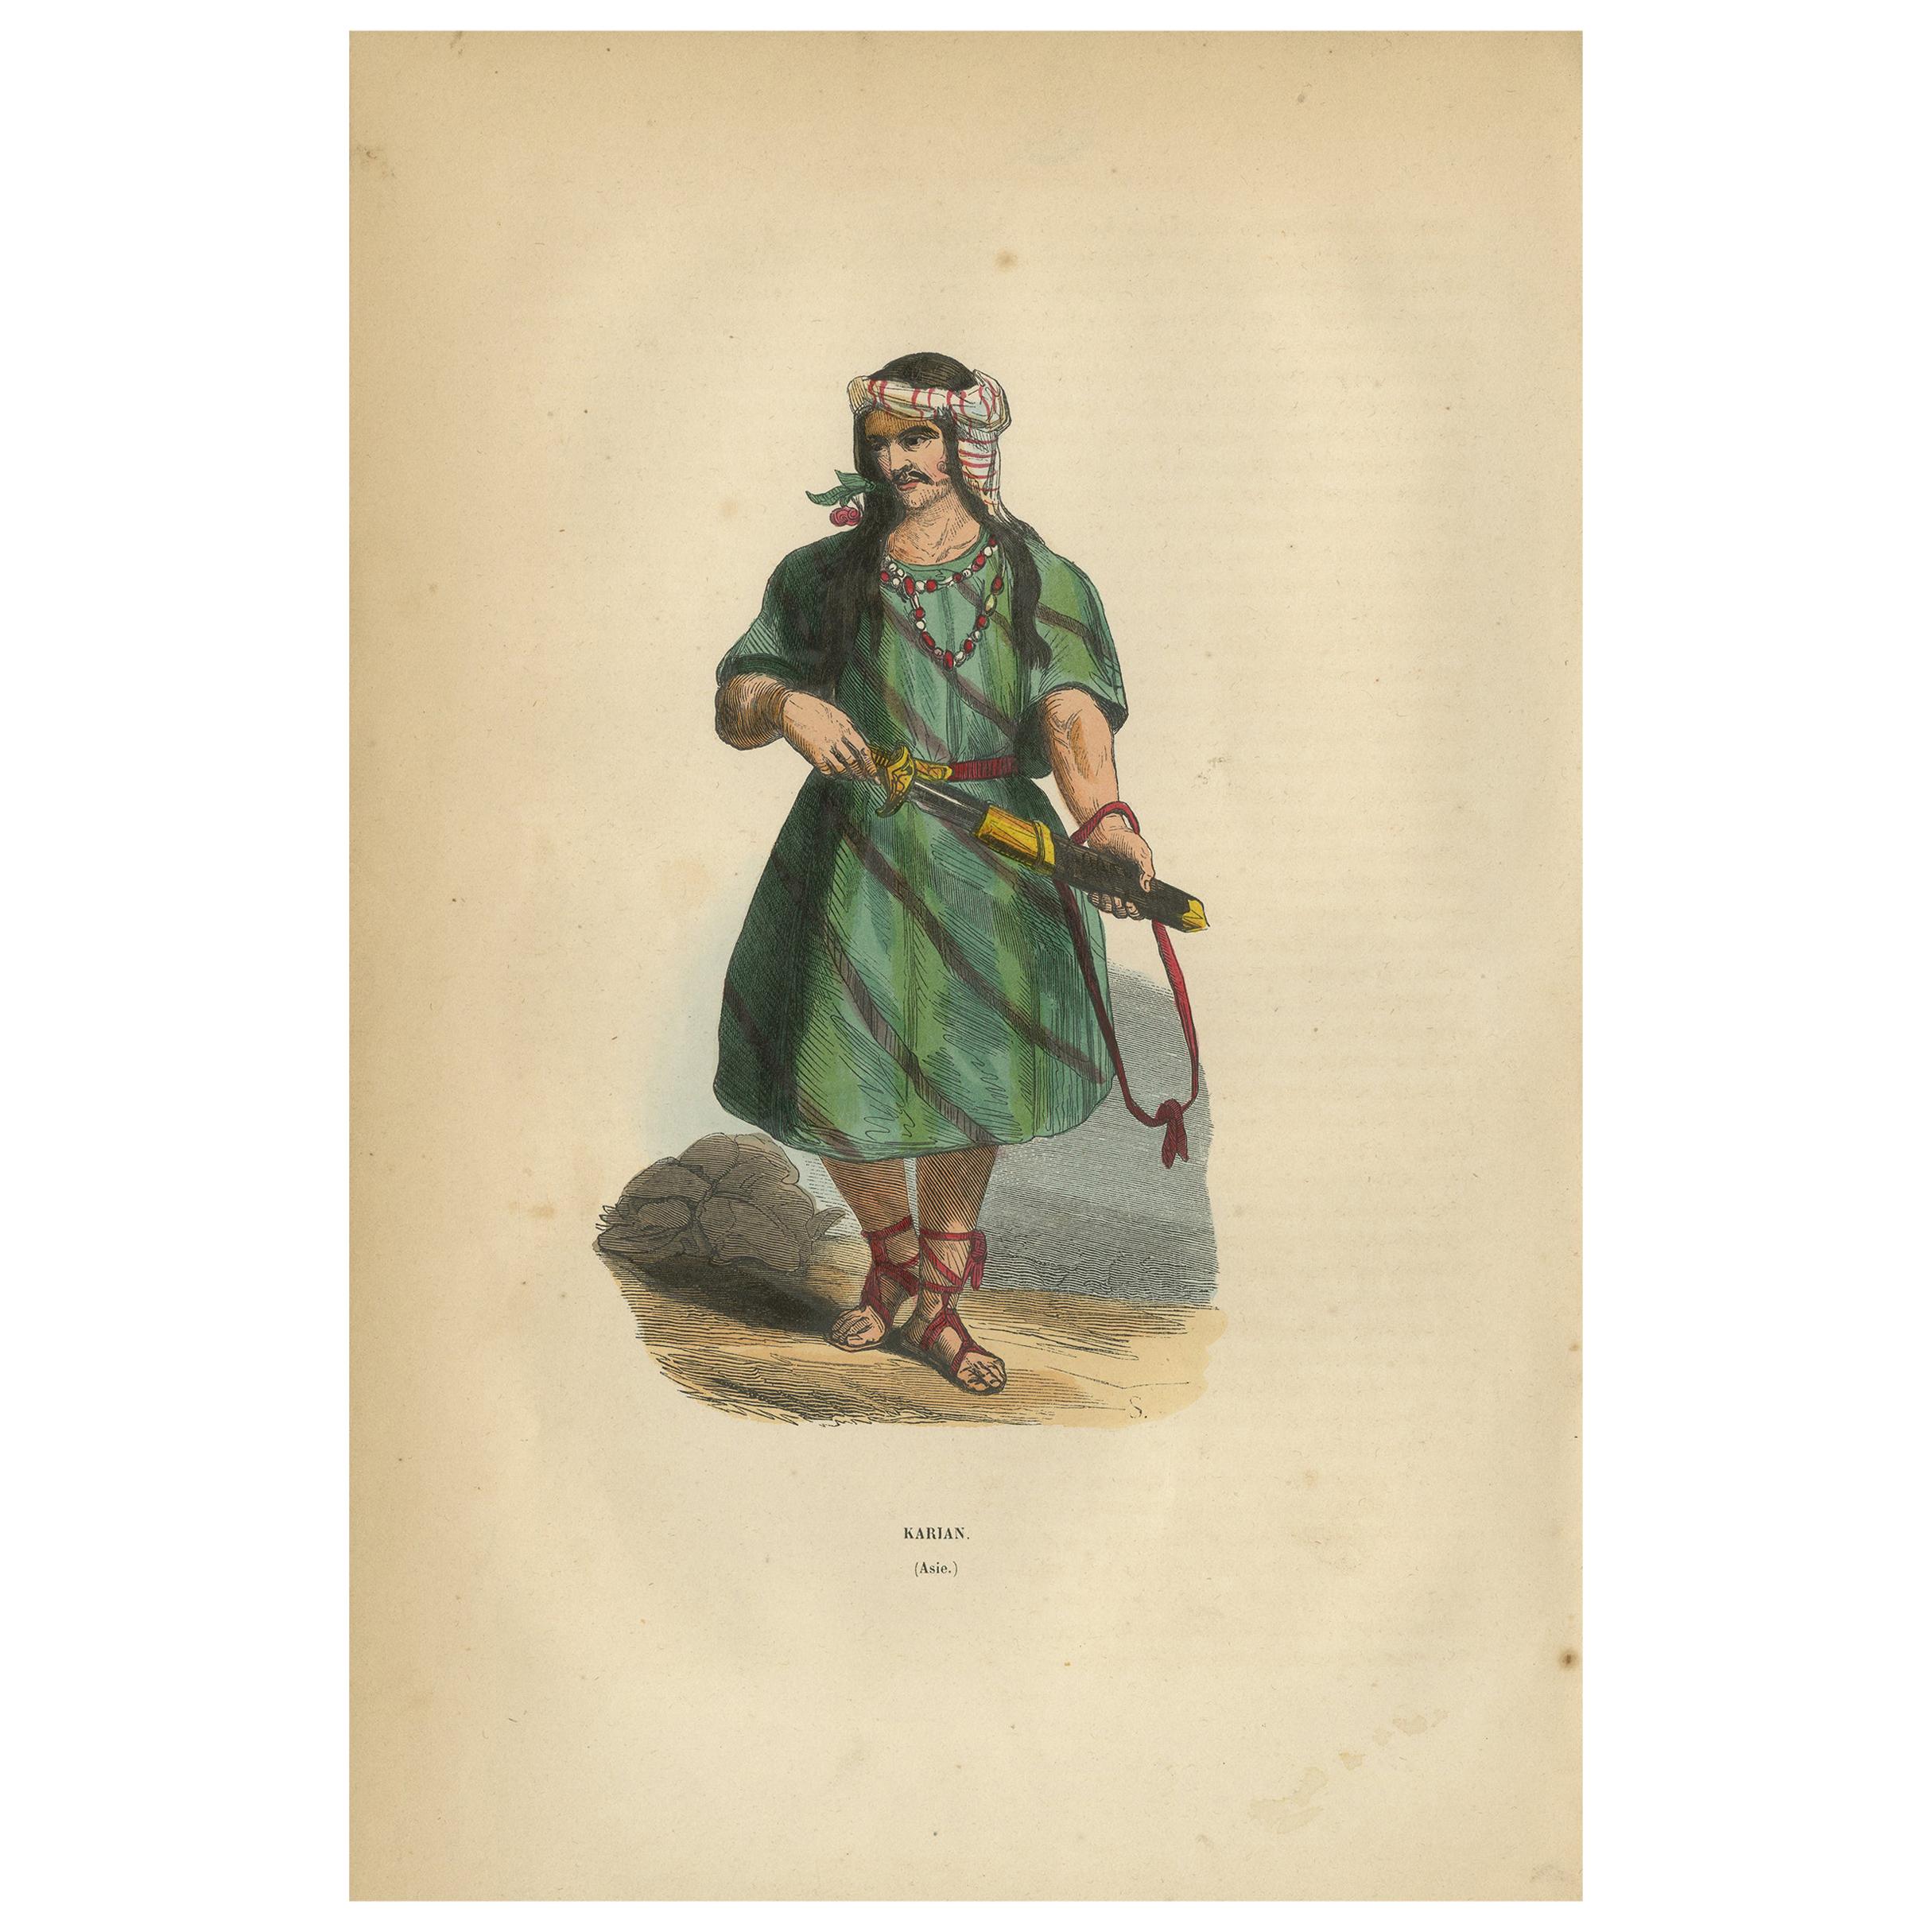 Antique Print of a Carian by Wahlen, 1843